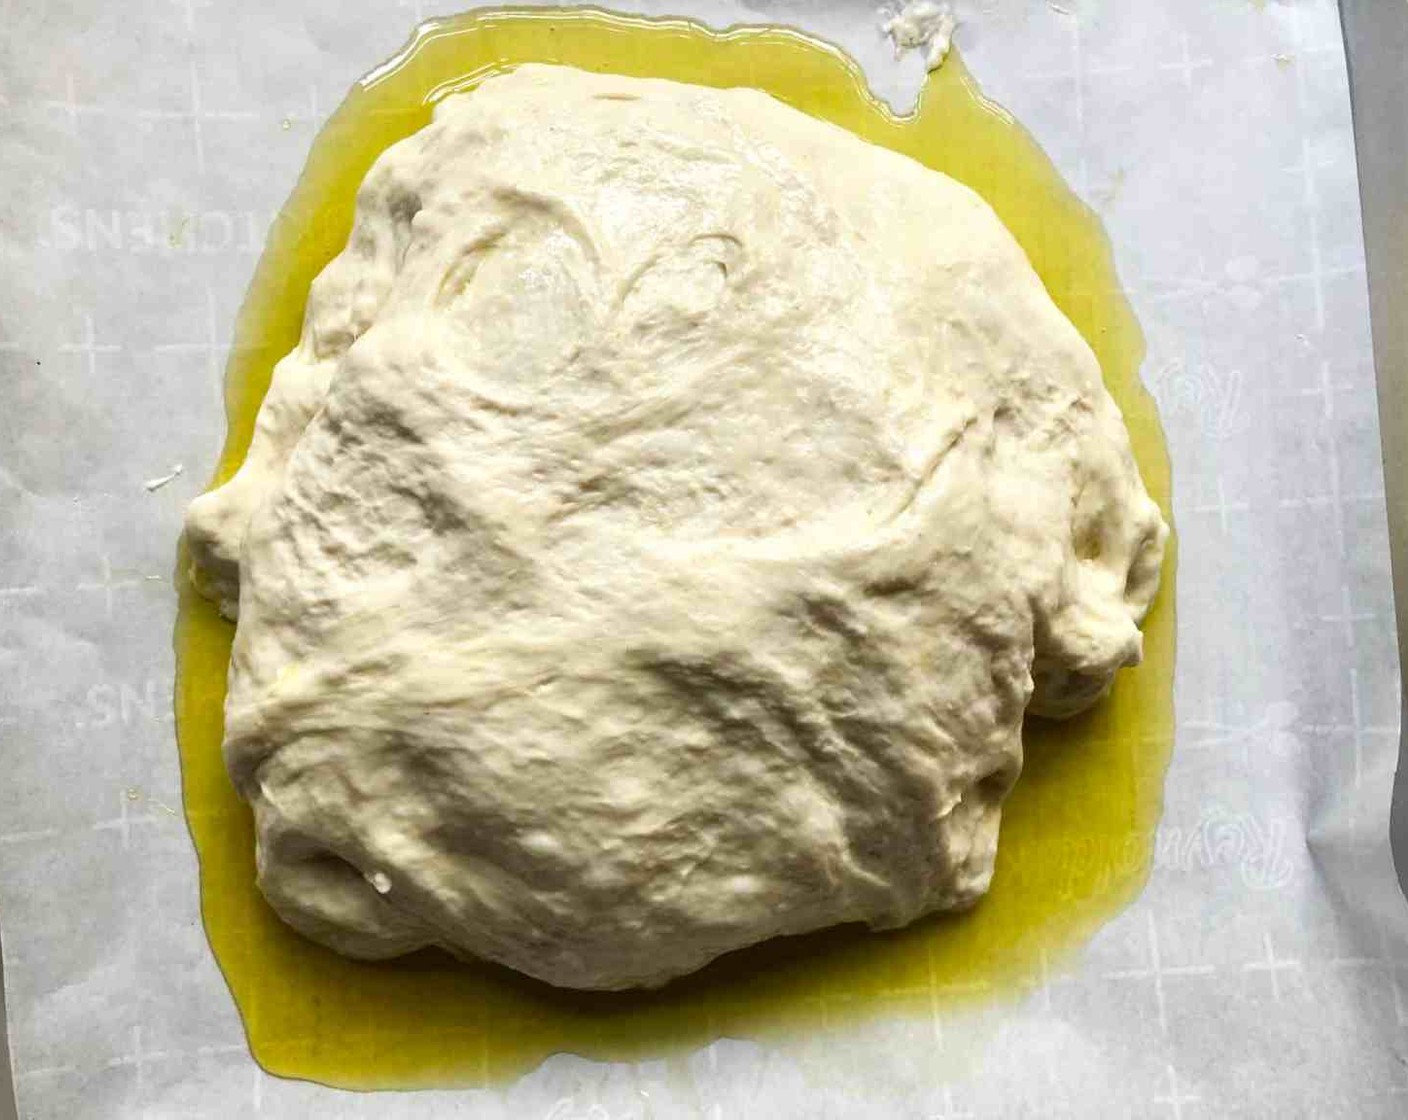 step 10 Use the forks to lift the dough onto the oil on the prepared sheet. Roll the dough ball in the oil to coat it all over. Let it rest uncovered, without touching it, for 20 minutes.